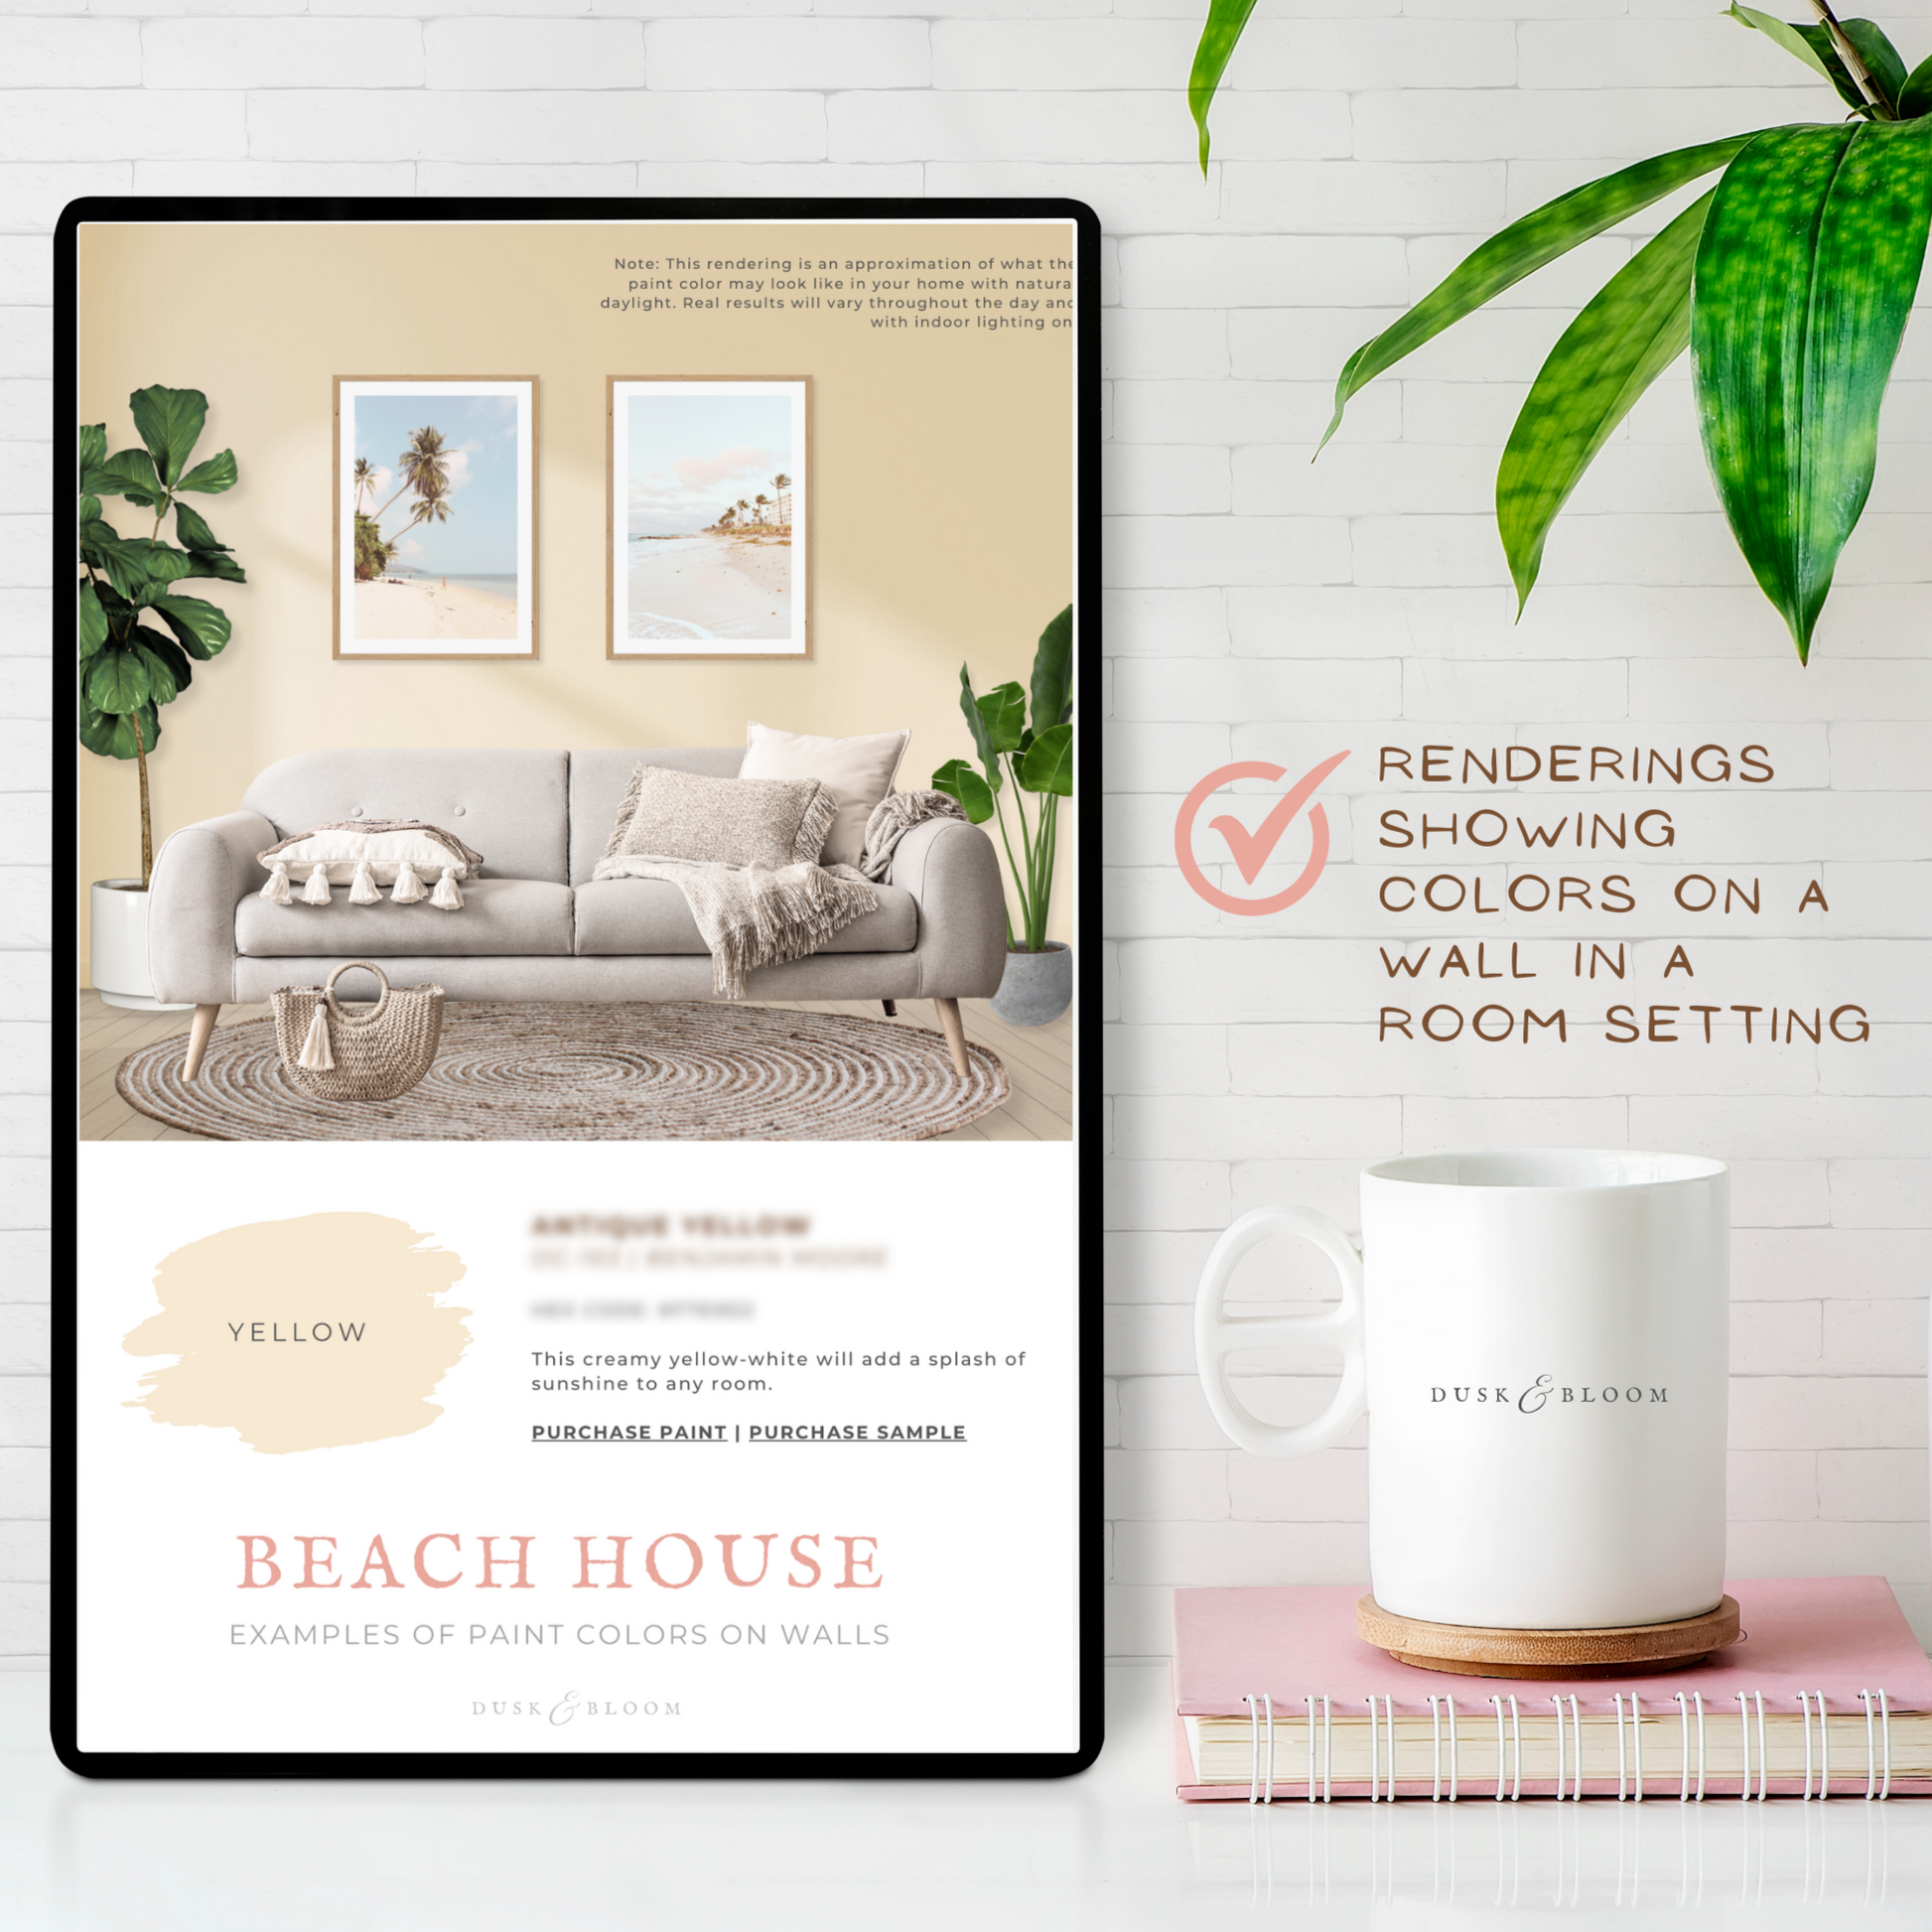 Beach House Paint Colors - Color Palette for Whole House Interior + Materials & Finishes Guide | Dusk & Bloom